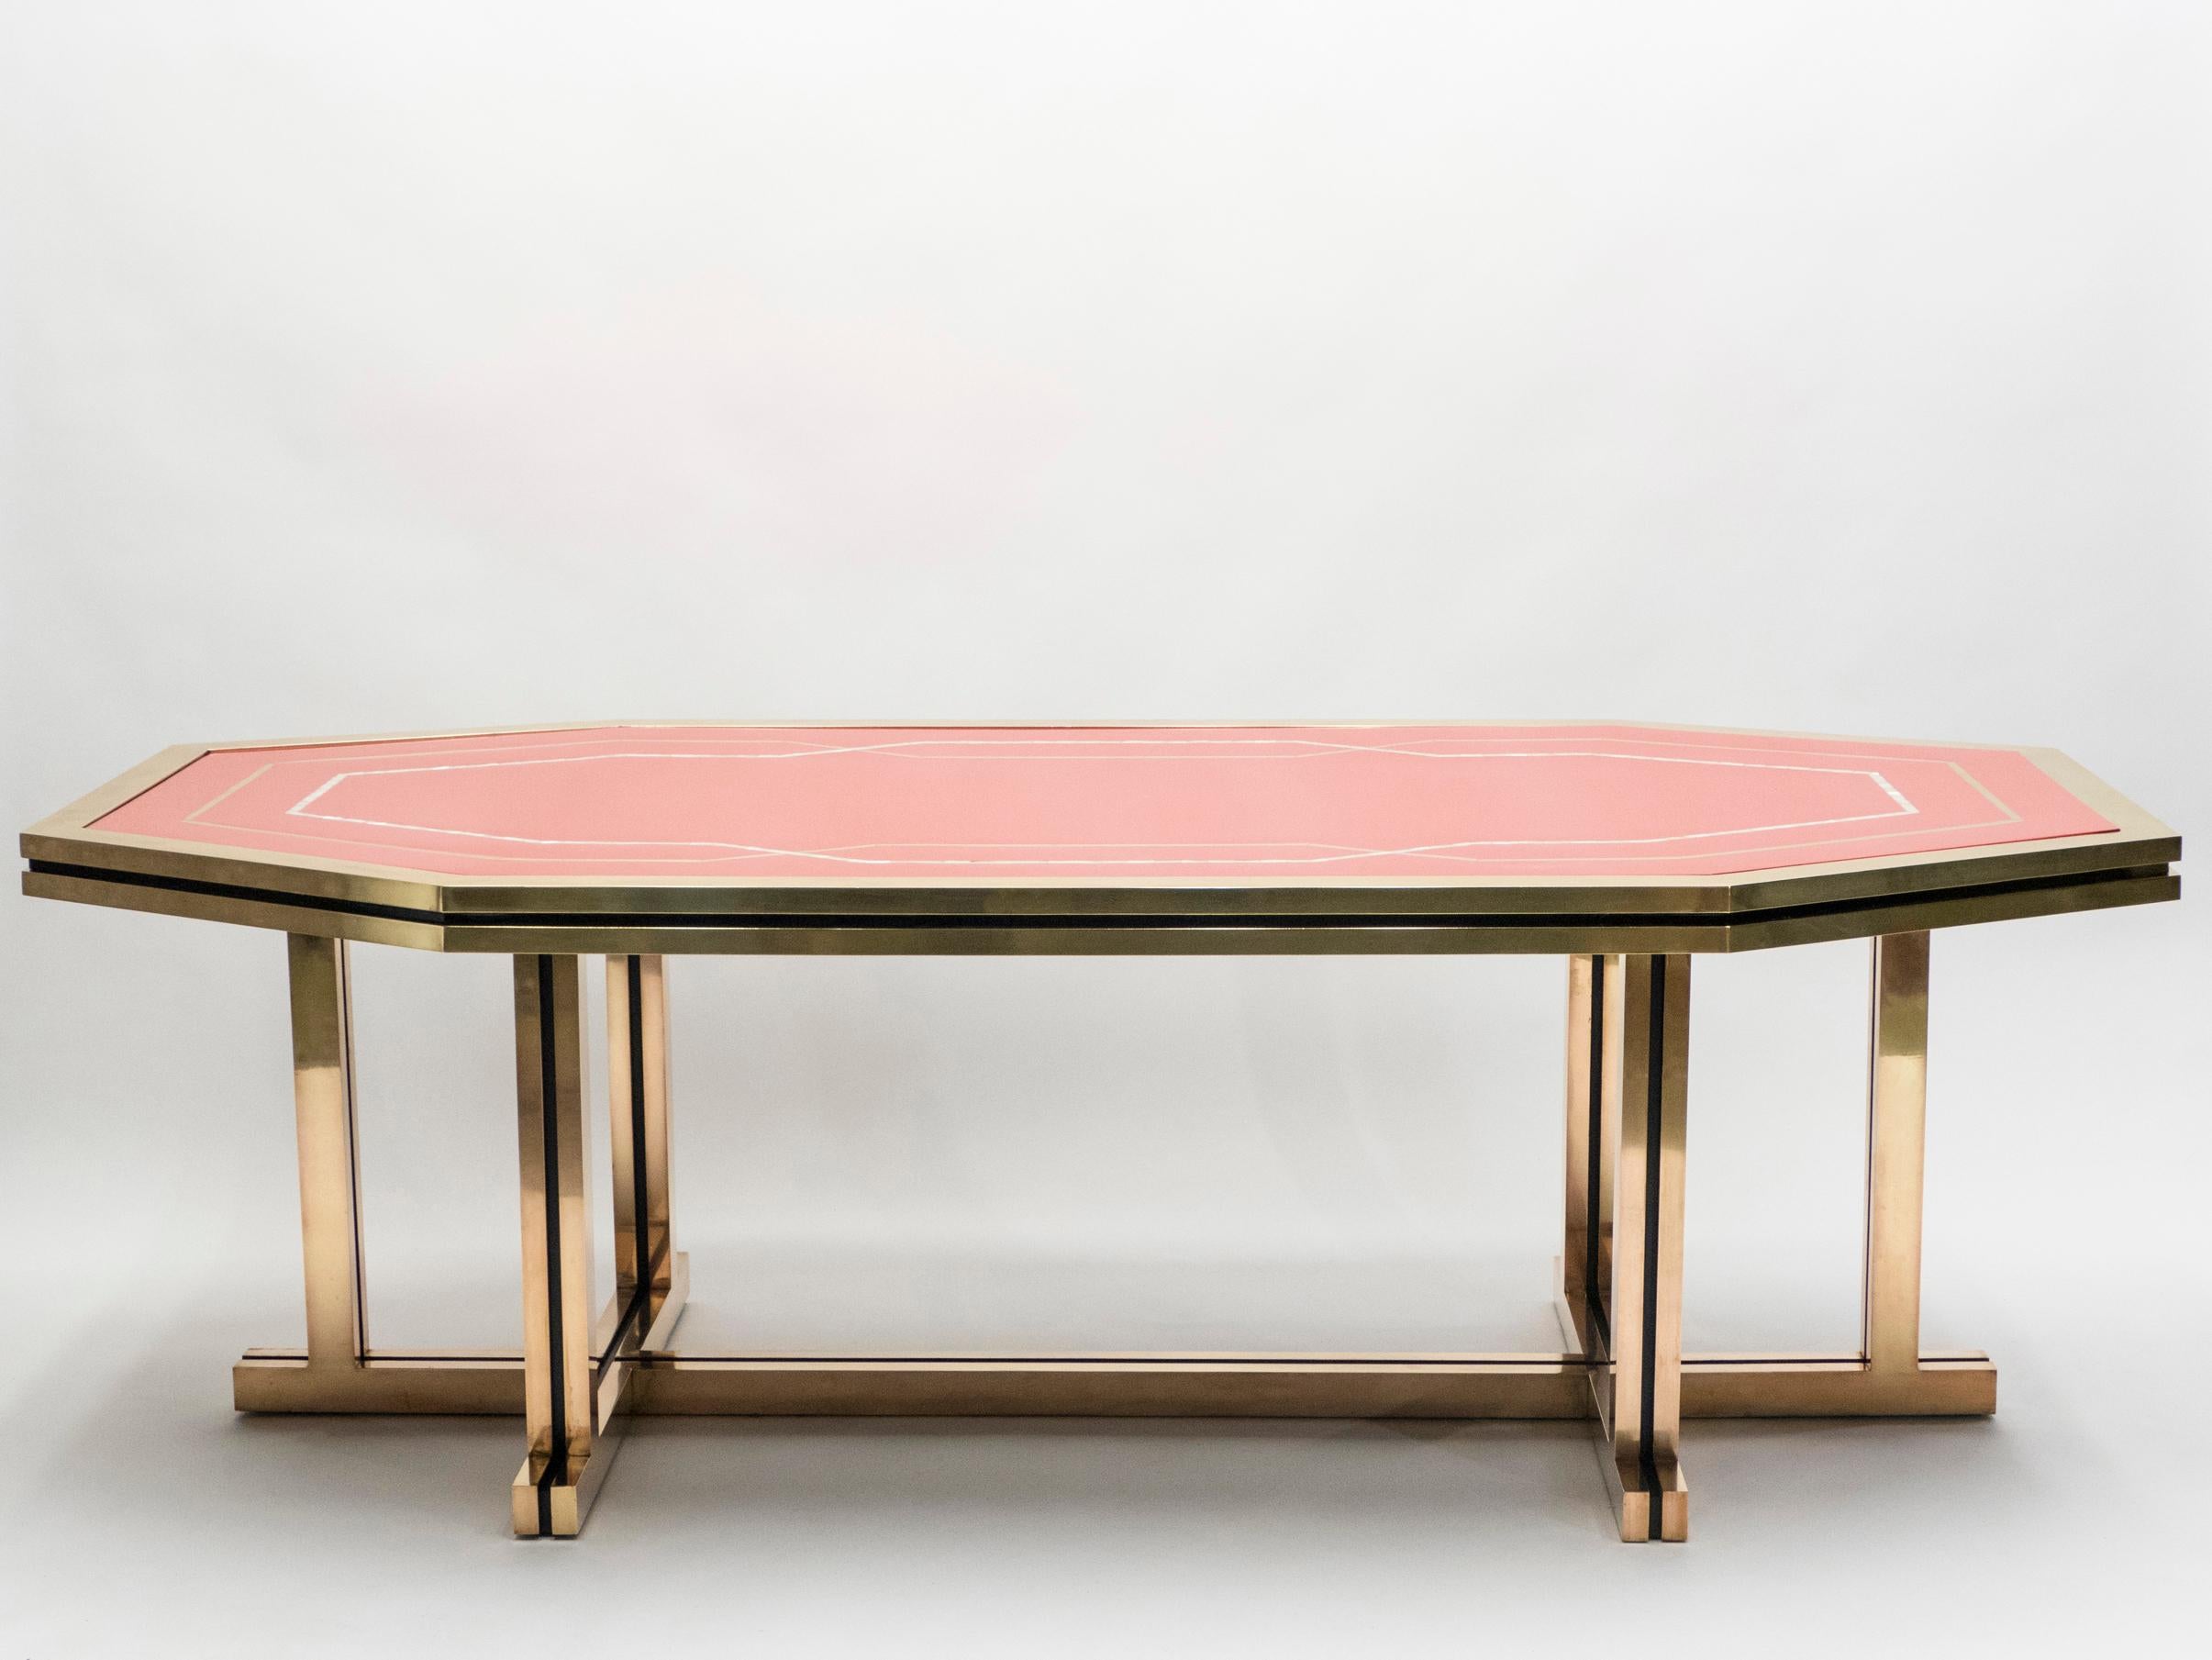 A rare piece from Maison Jansen, this large dining table was a commission by a private client. With its impeccable design, perfect proportions, and high-end materials like mother of pearl lacquer and brass, it was likely a hugely expensive